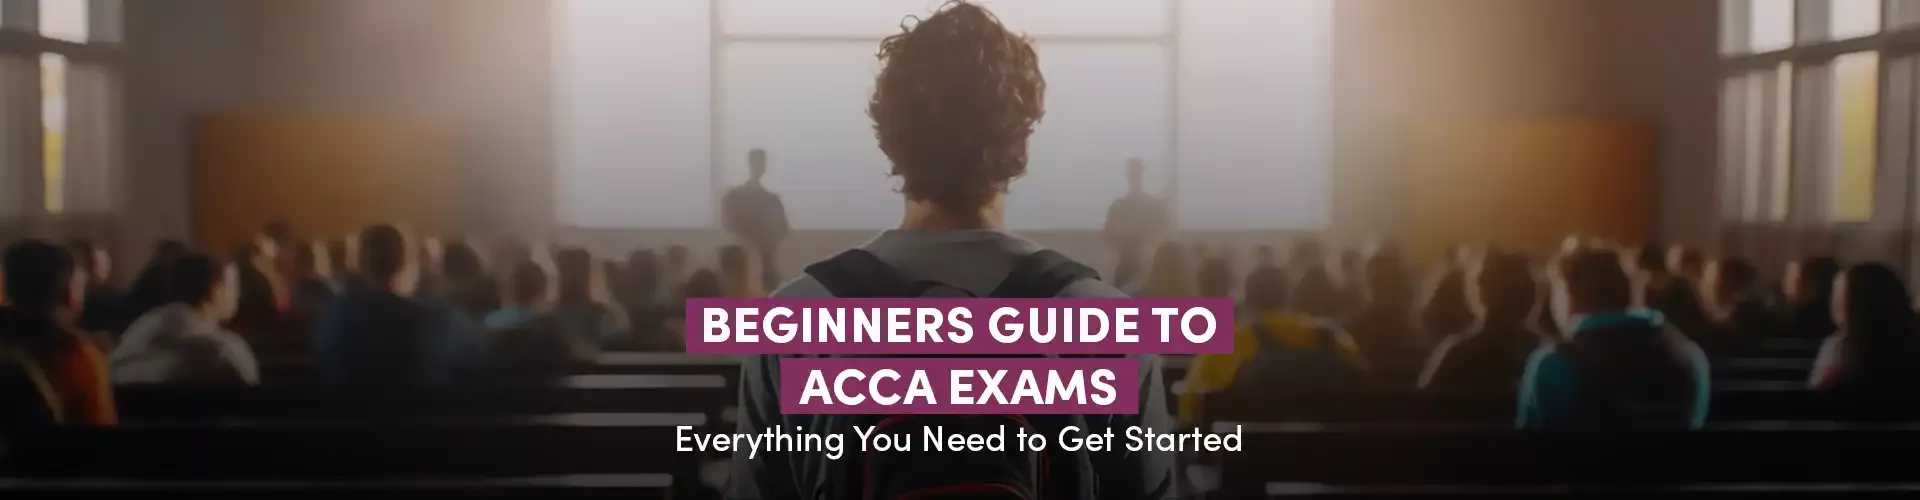 Beginners Guide to ACСA Exams: Everything You Need to Get Started